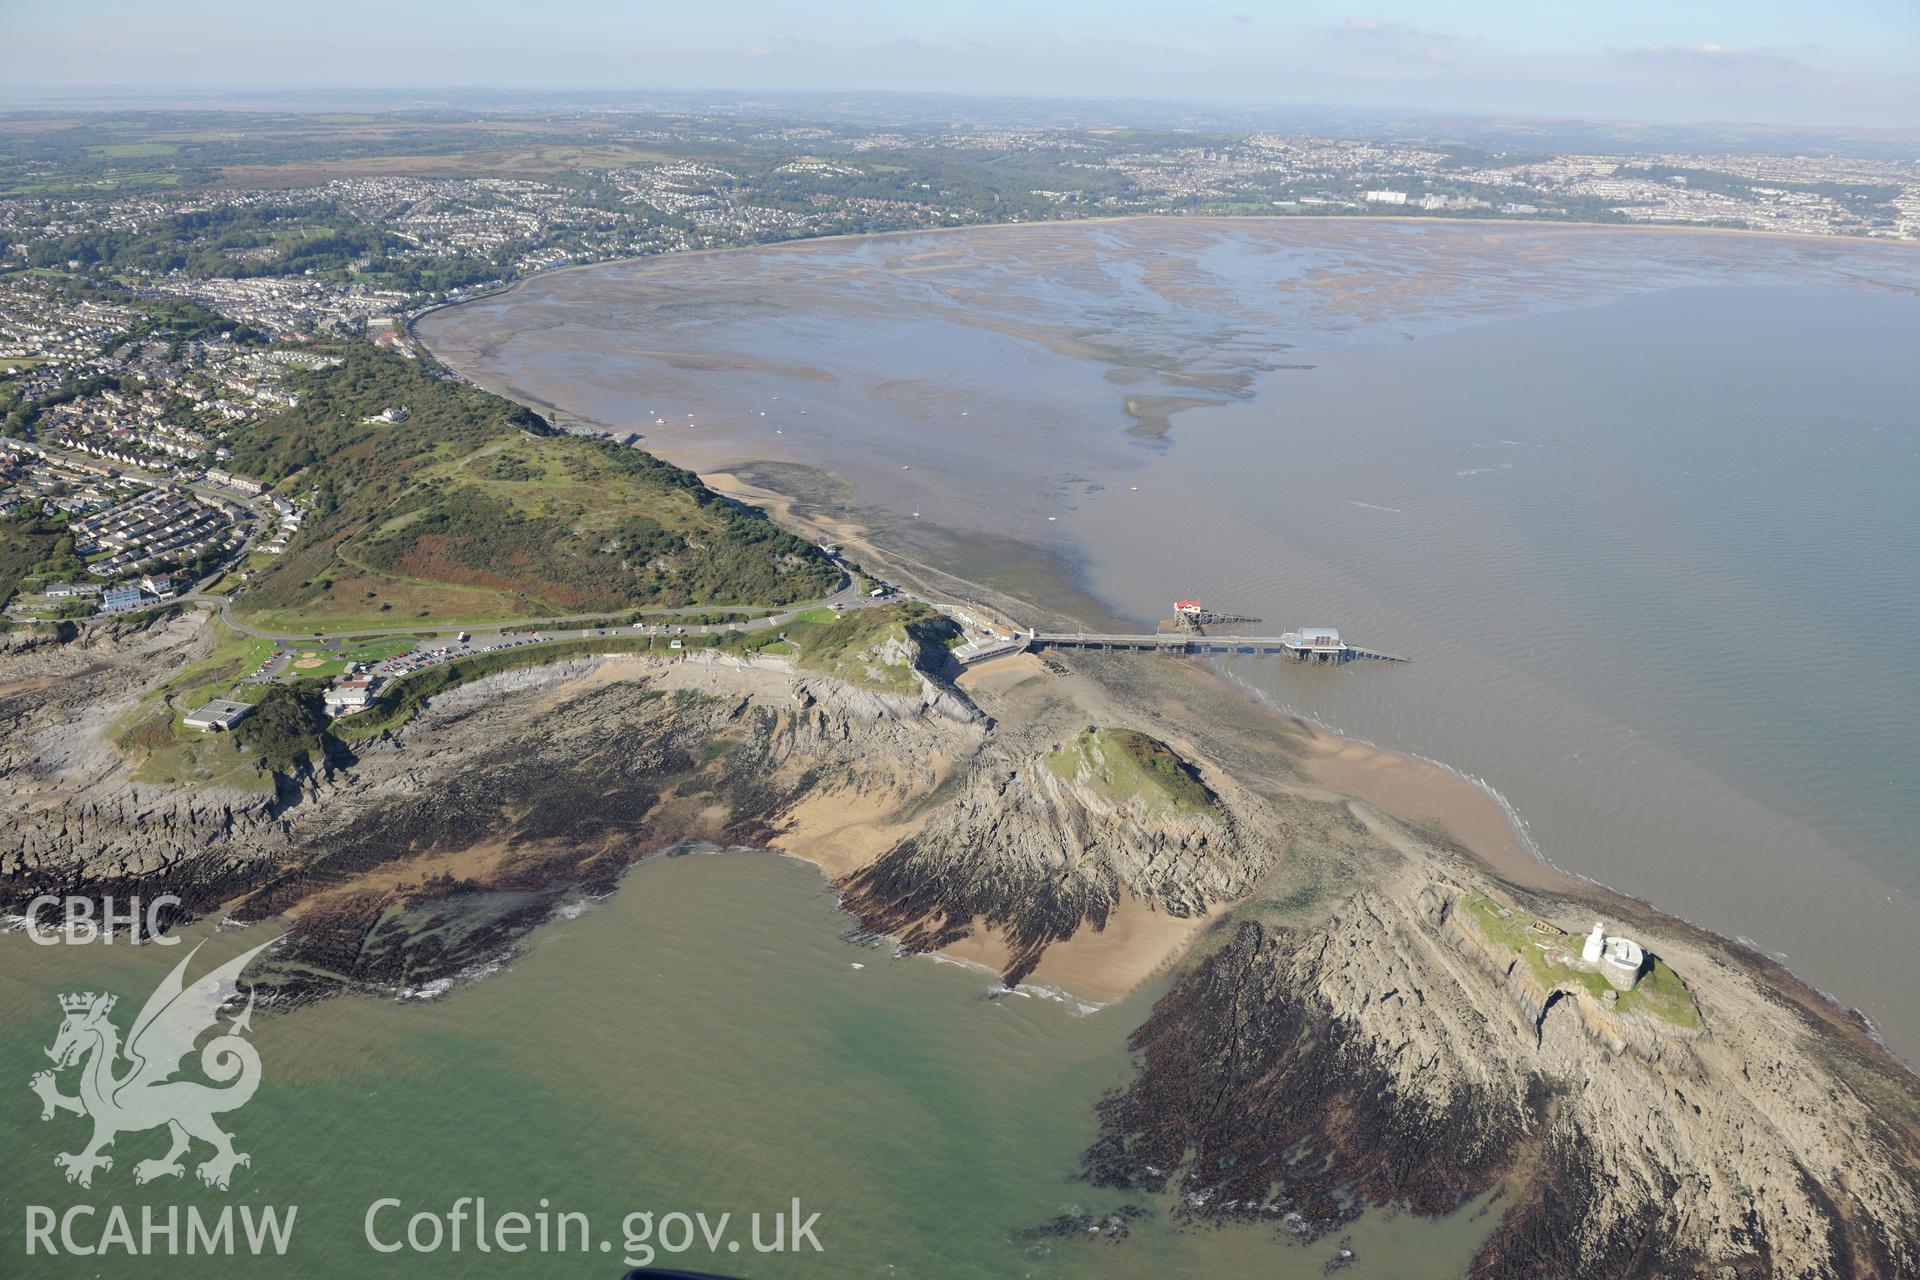 Mumbles fort, pier and lighthouse at the south western edge of Swansea Bay, with Swansea city beyond. Oblique aerial photograph taken during the Royal Commission's programme of archaeological aerial reconnaissance by Toby Driver on 30th September 2015.